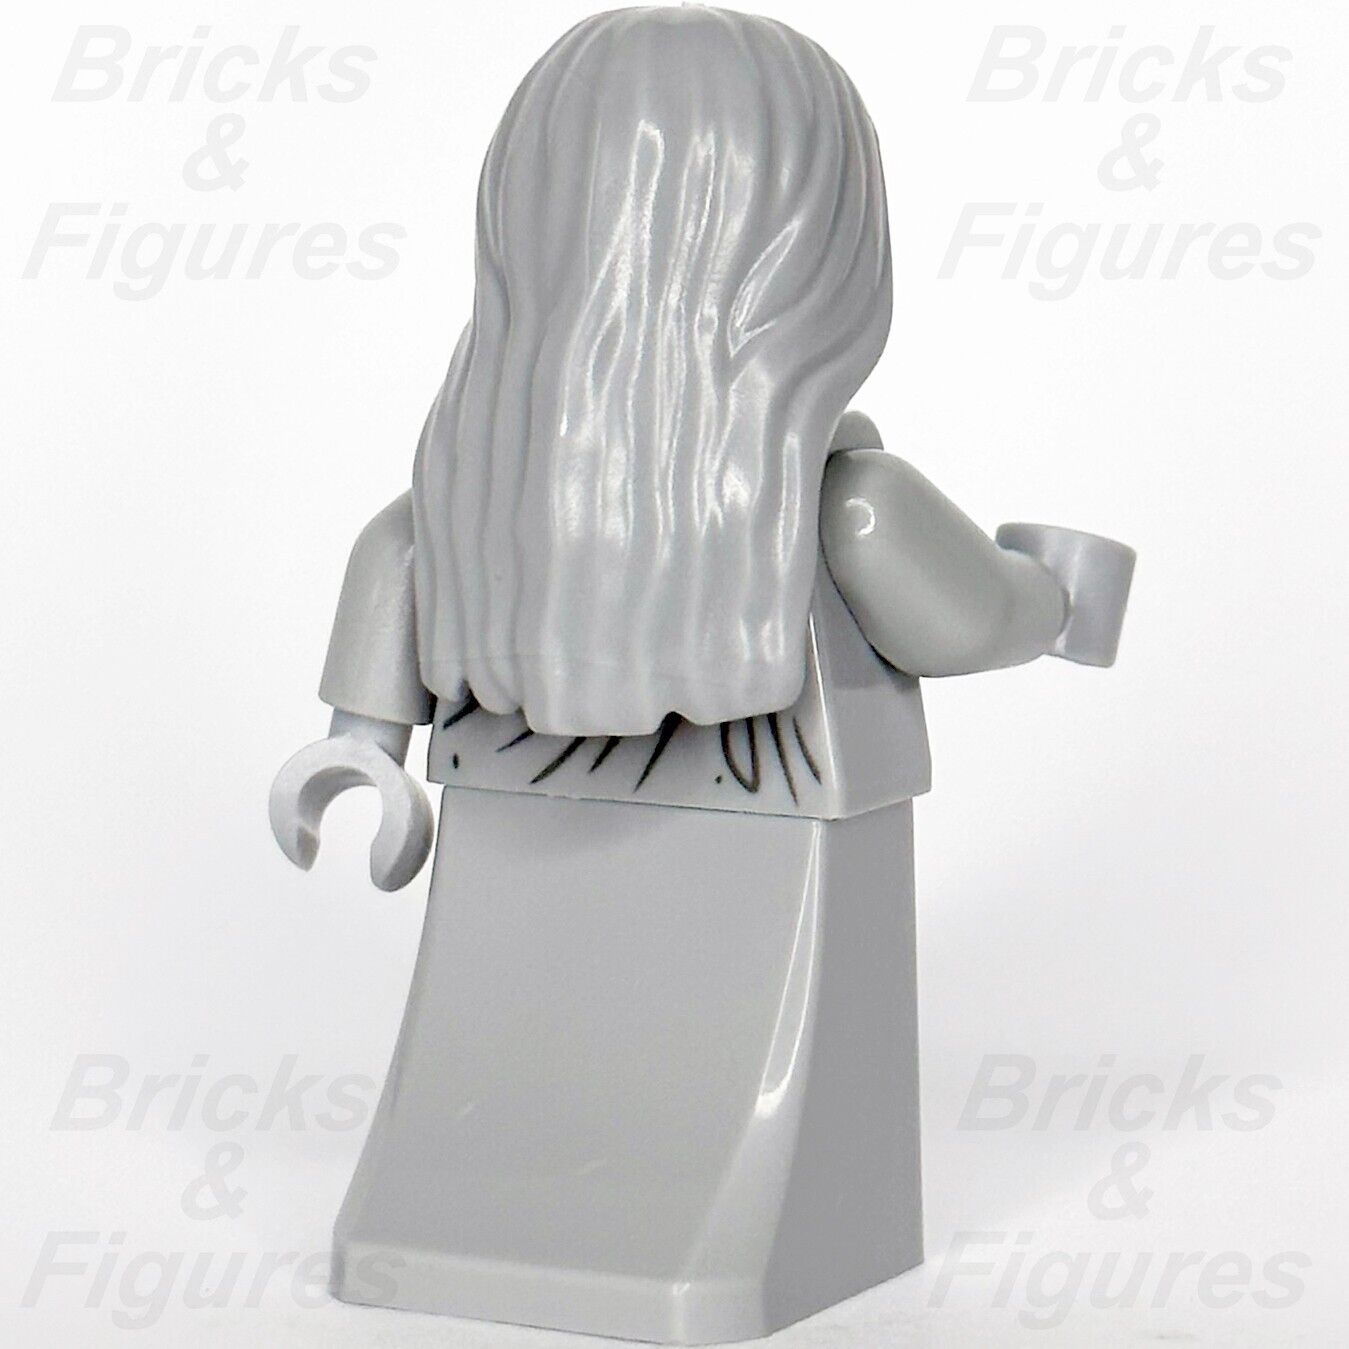 LEGO Elf Statue Minifigure The Hobbit & The Lord of the Rings 10316 lor114 LOTR - Bricks & Figures